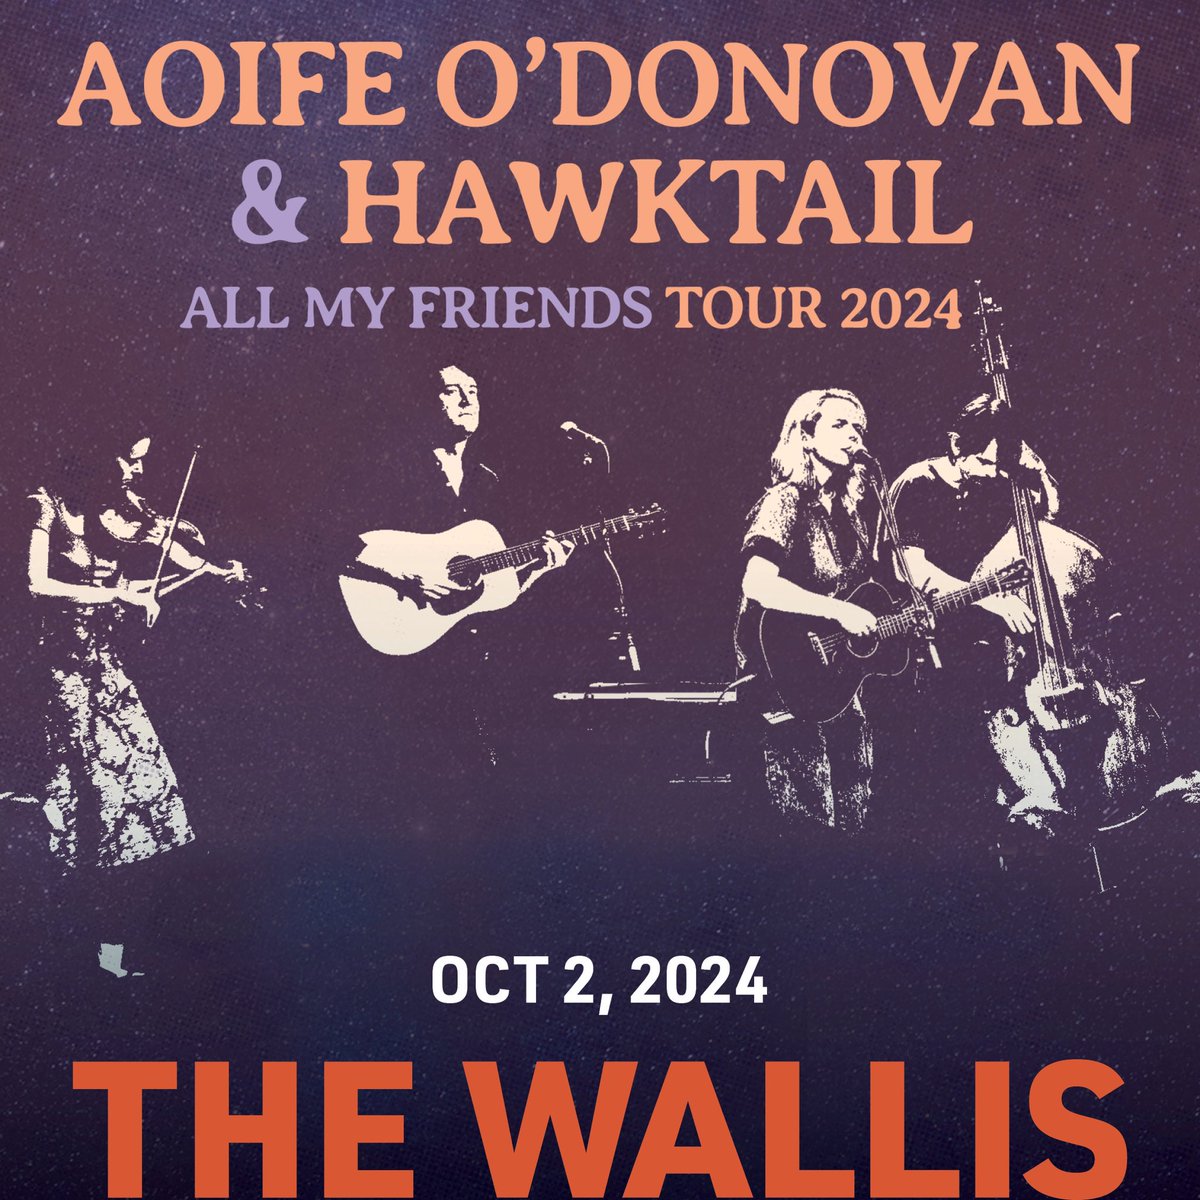 LA! After the listening event in March, I couldn’t stay away. SO EXCITED to return Oct 2nd with my friends @hawktailband to play the beautiful Wallis Center. Tickets are now on sale here: tickets.thewallis.org/single/SelectS… 💚